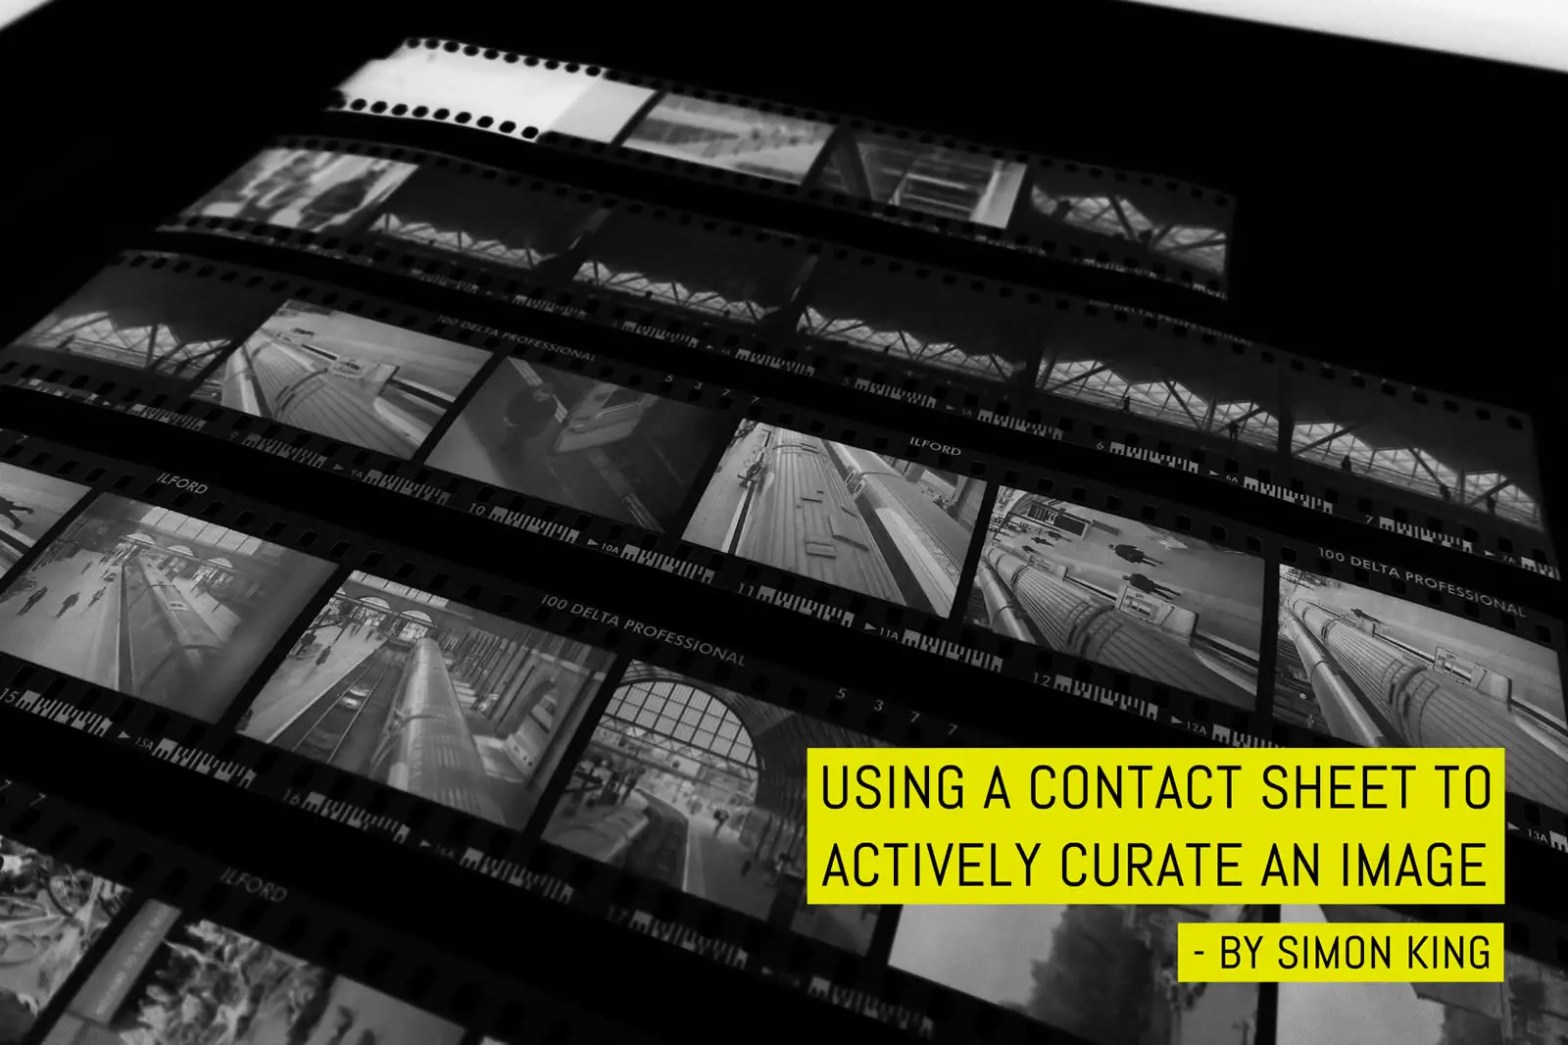 Using a contact sheet to actively curate an image